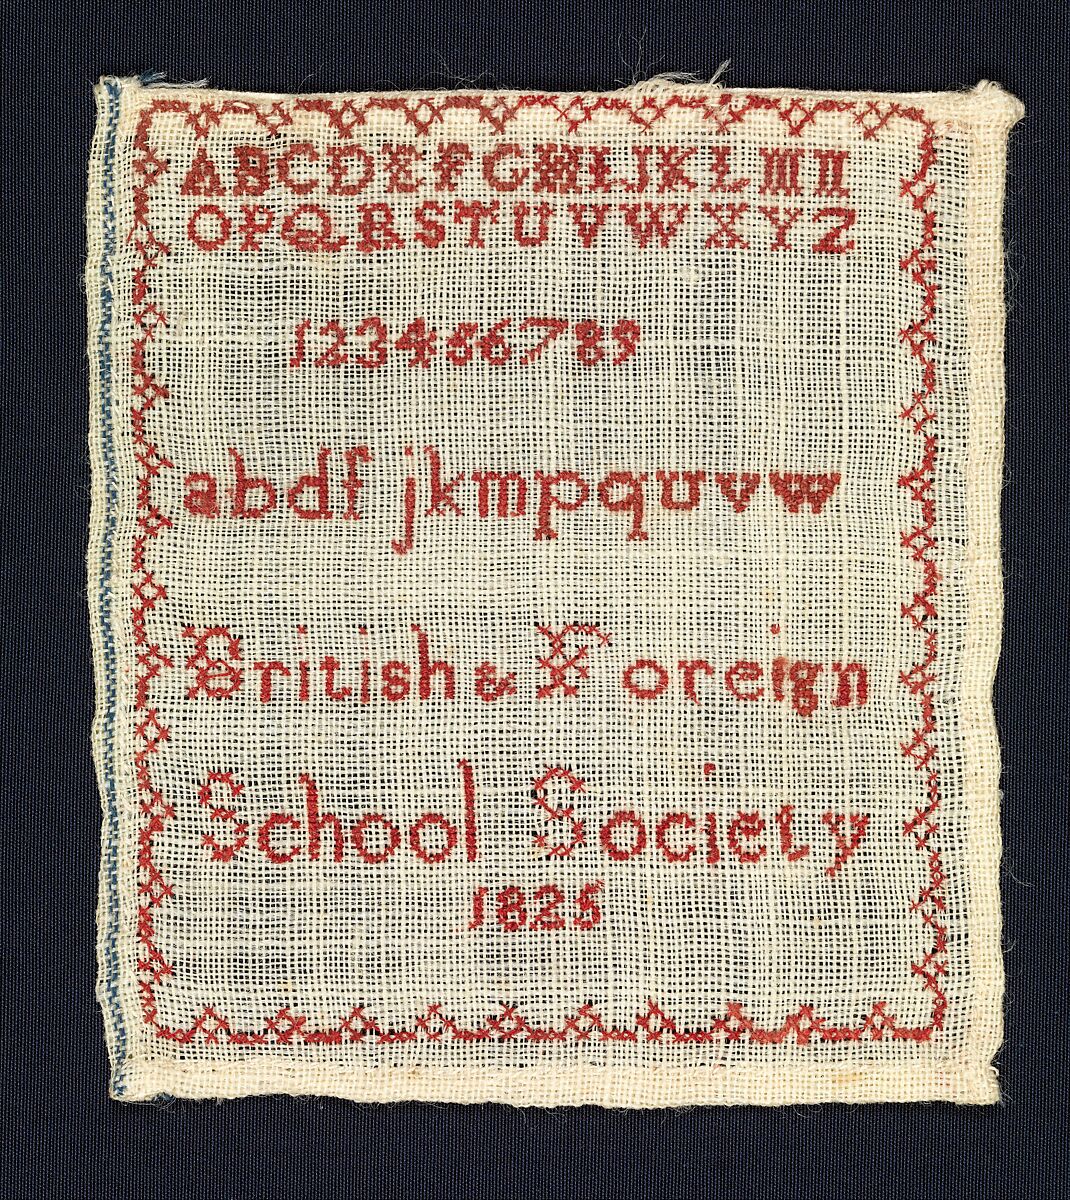 Sampler made at the British and Foreign School Society, Wool embroidery on cotton, British 